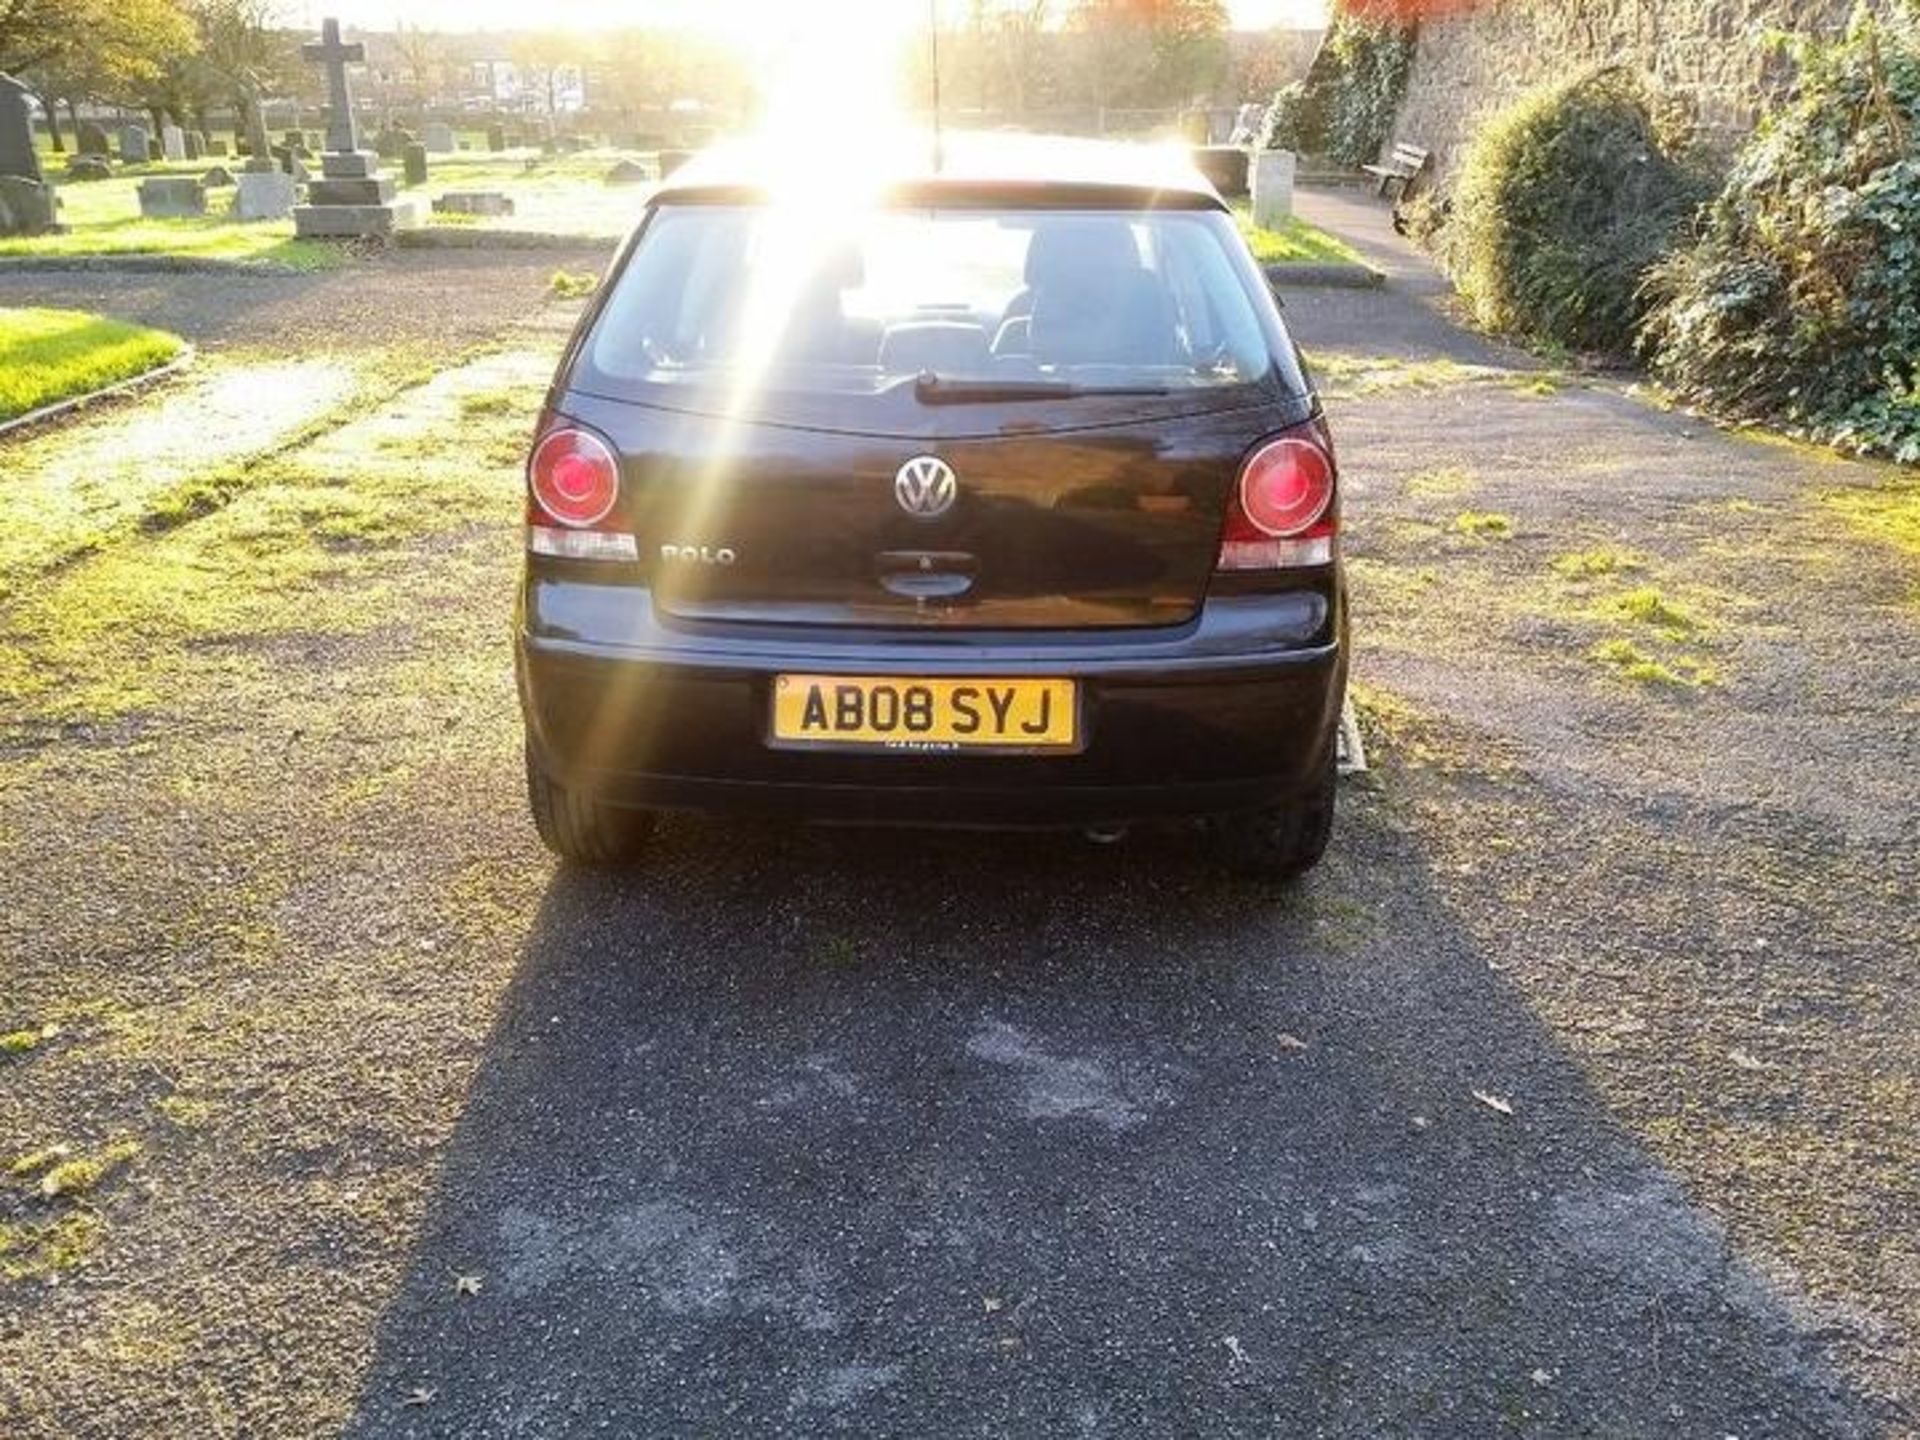 VOLKSWAGEN, POLO 1-2 MATCH, AB08 SYJ, 1-2 LTR, PETROL, MANUAL, 4 DOOR HATCH, 06.06.2008, CURRENT - Image 5 of 16